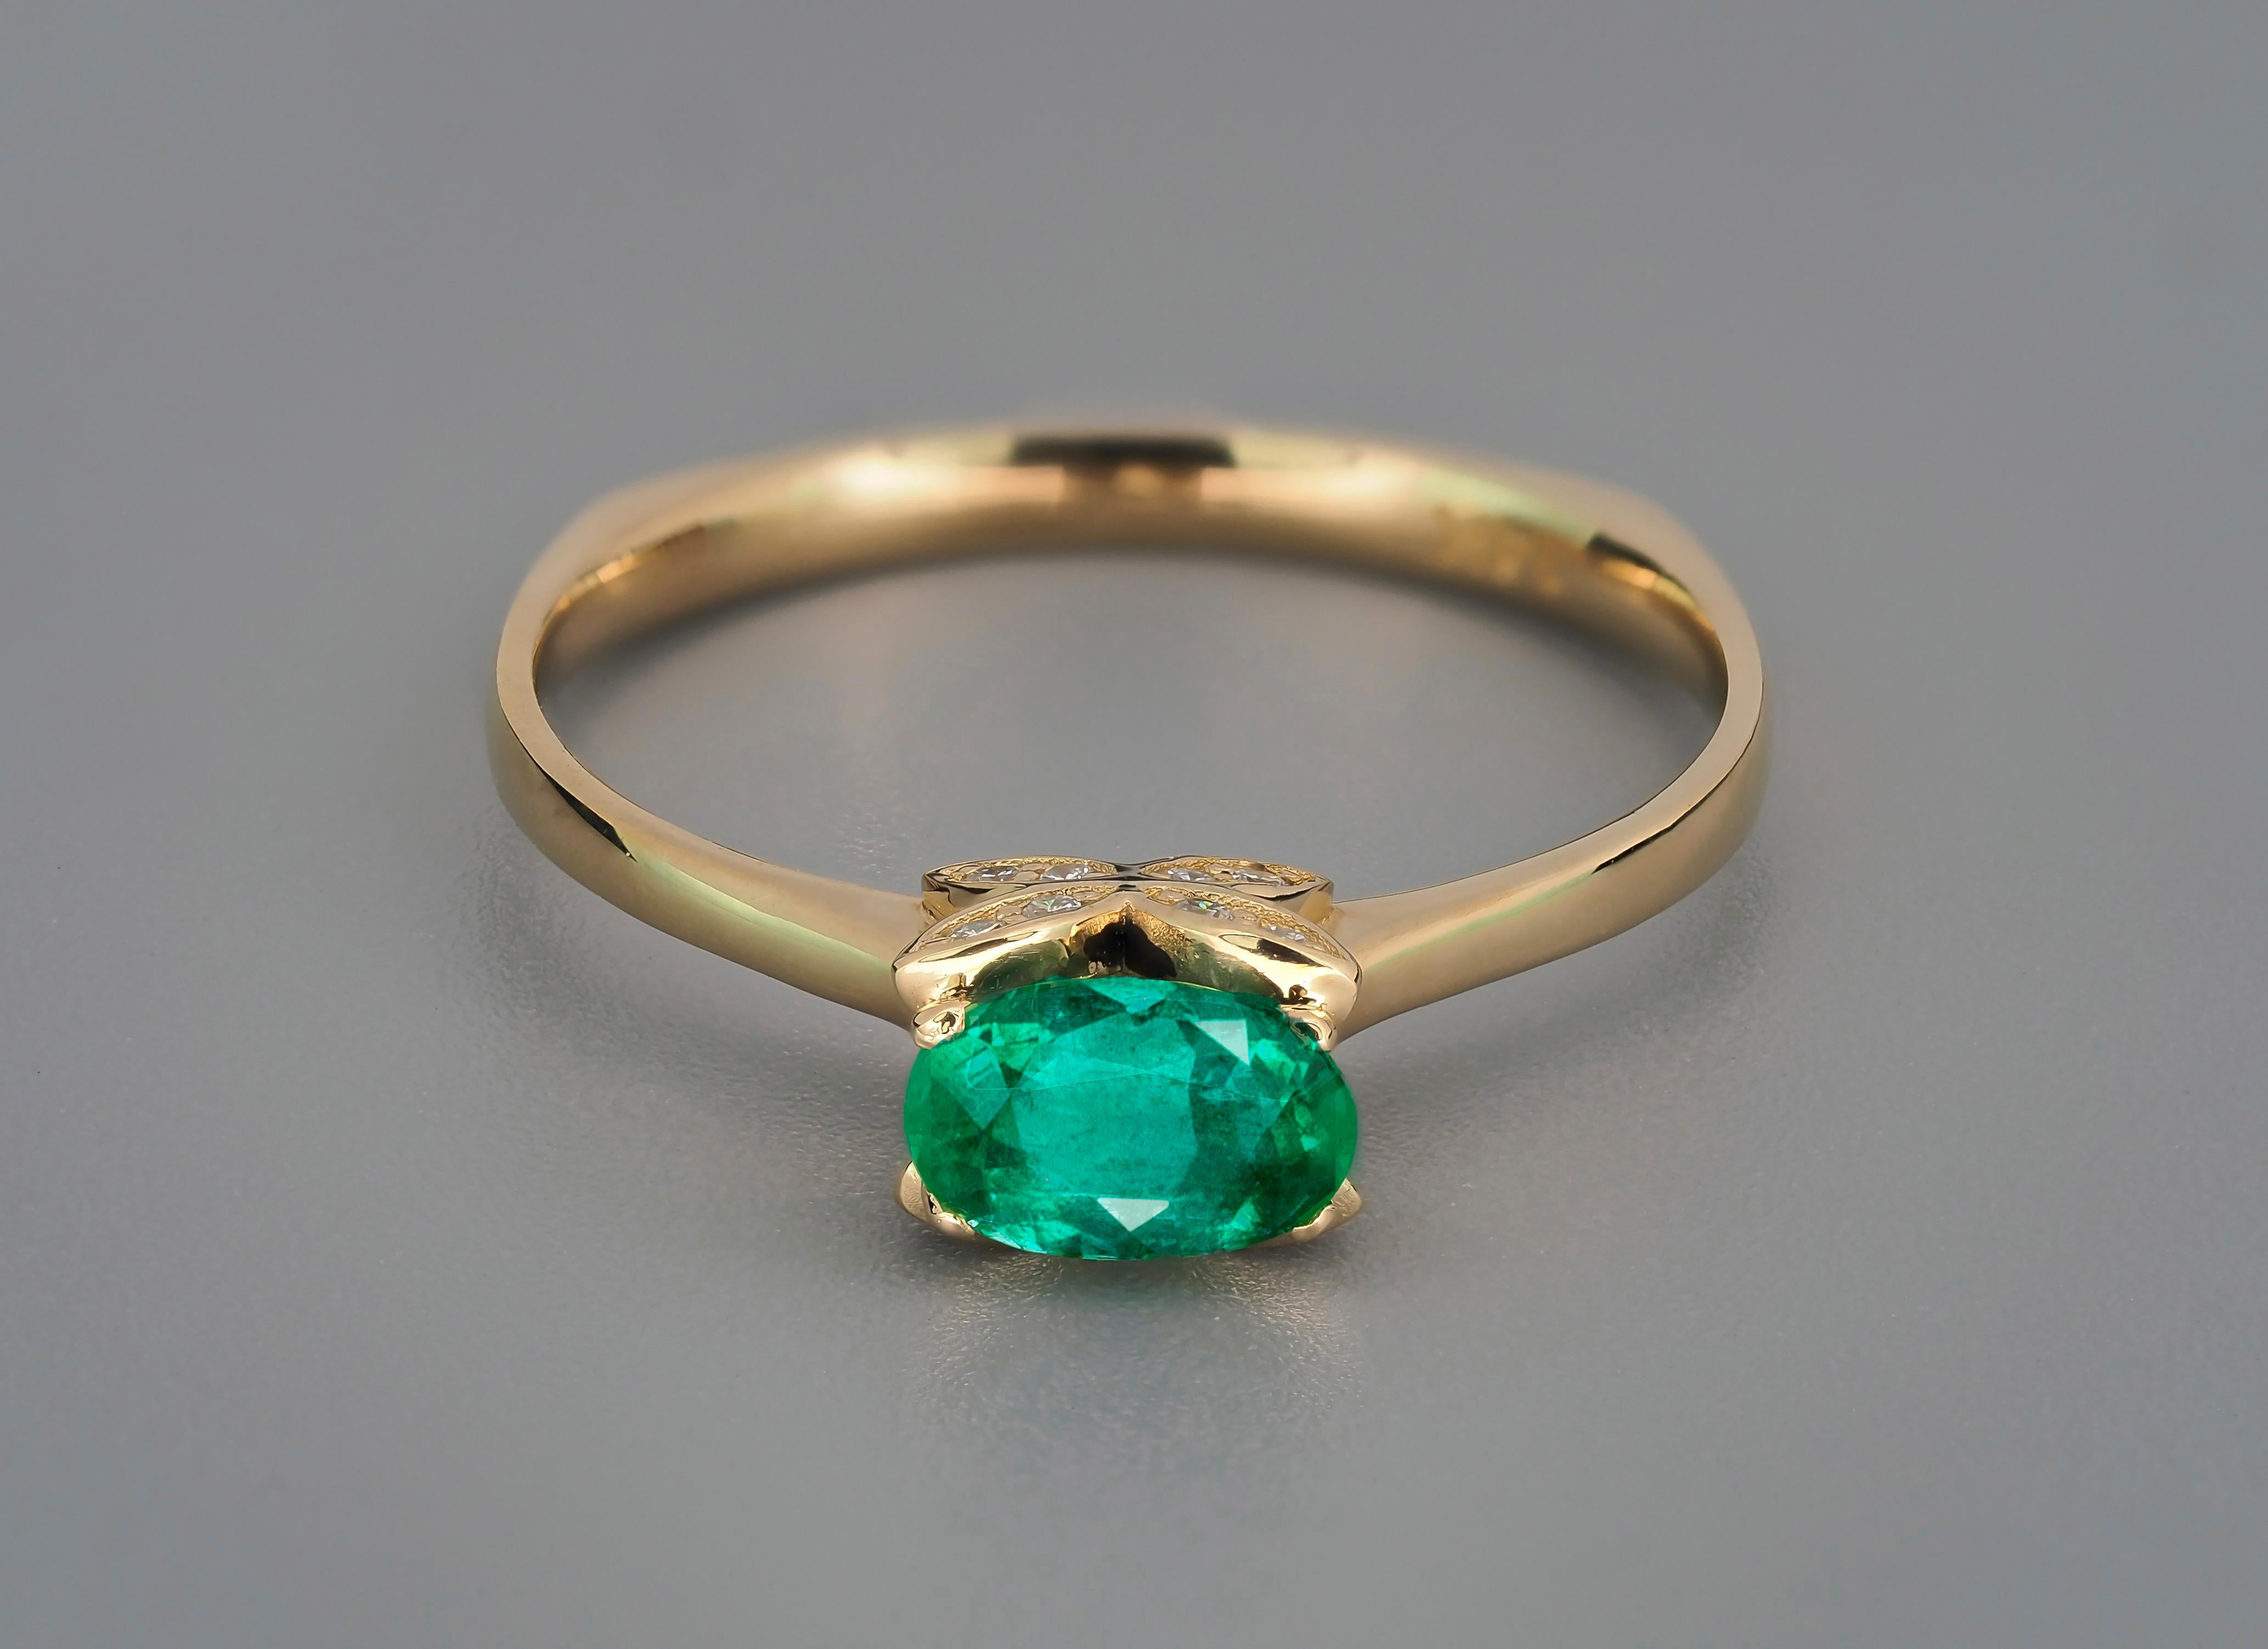 Butterfly design 14 kt gold ring with emerald and diamonds.
Weight approx. 1.9 g.
Set with emerald, color - green
Oval cut, 0.80 ct. 
Clarity: Transparent with inclusions (emerald garden)
Surrounding stone - diamonds (F/VS), round brilliant cut,